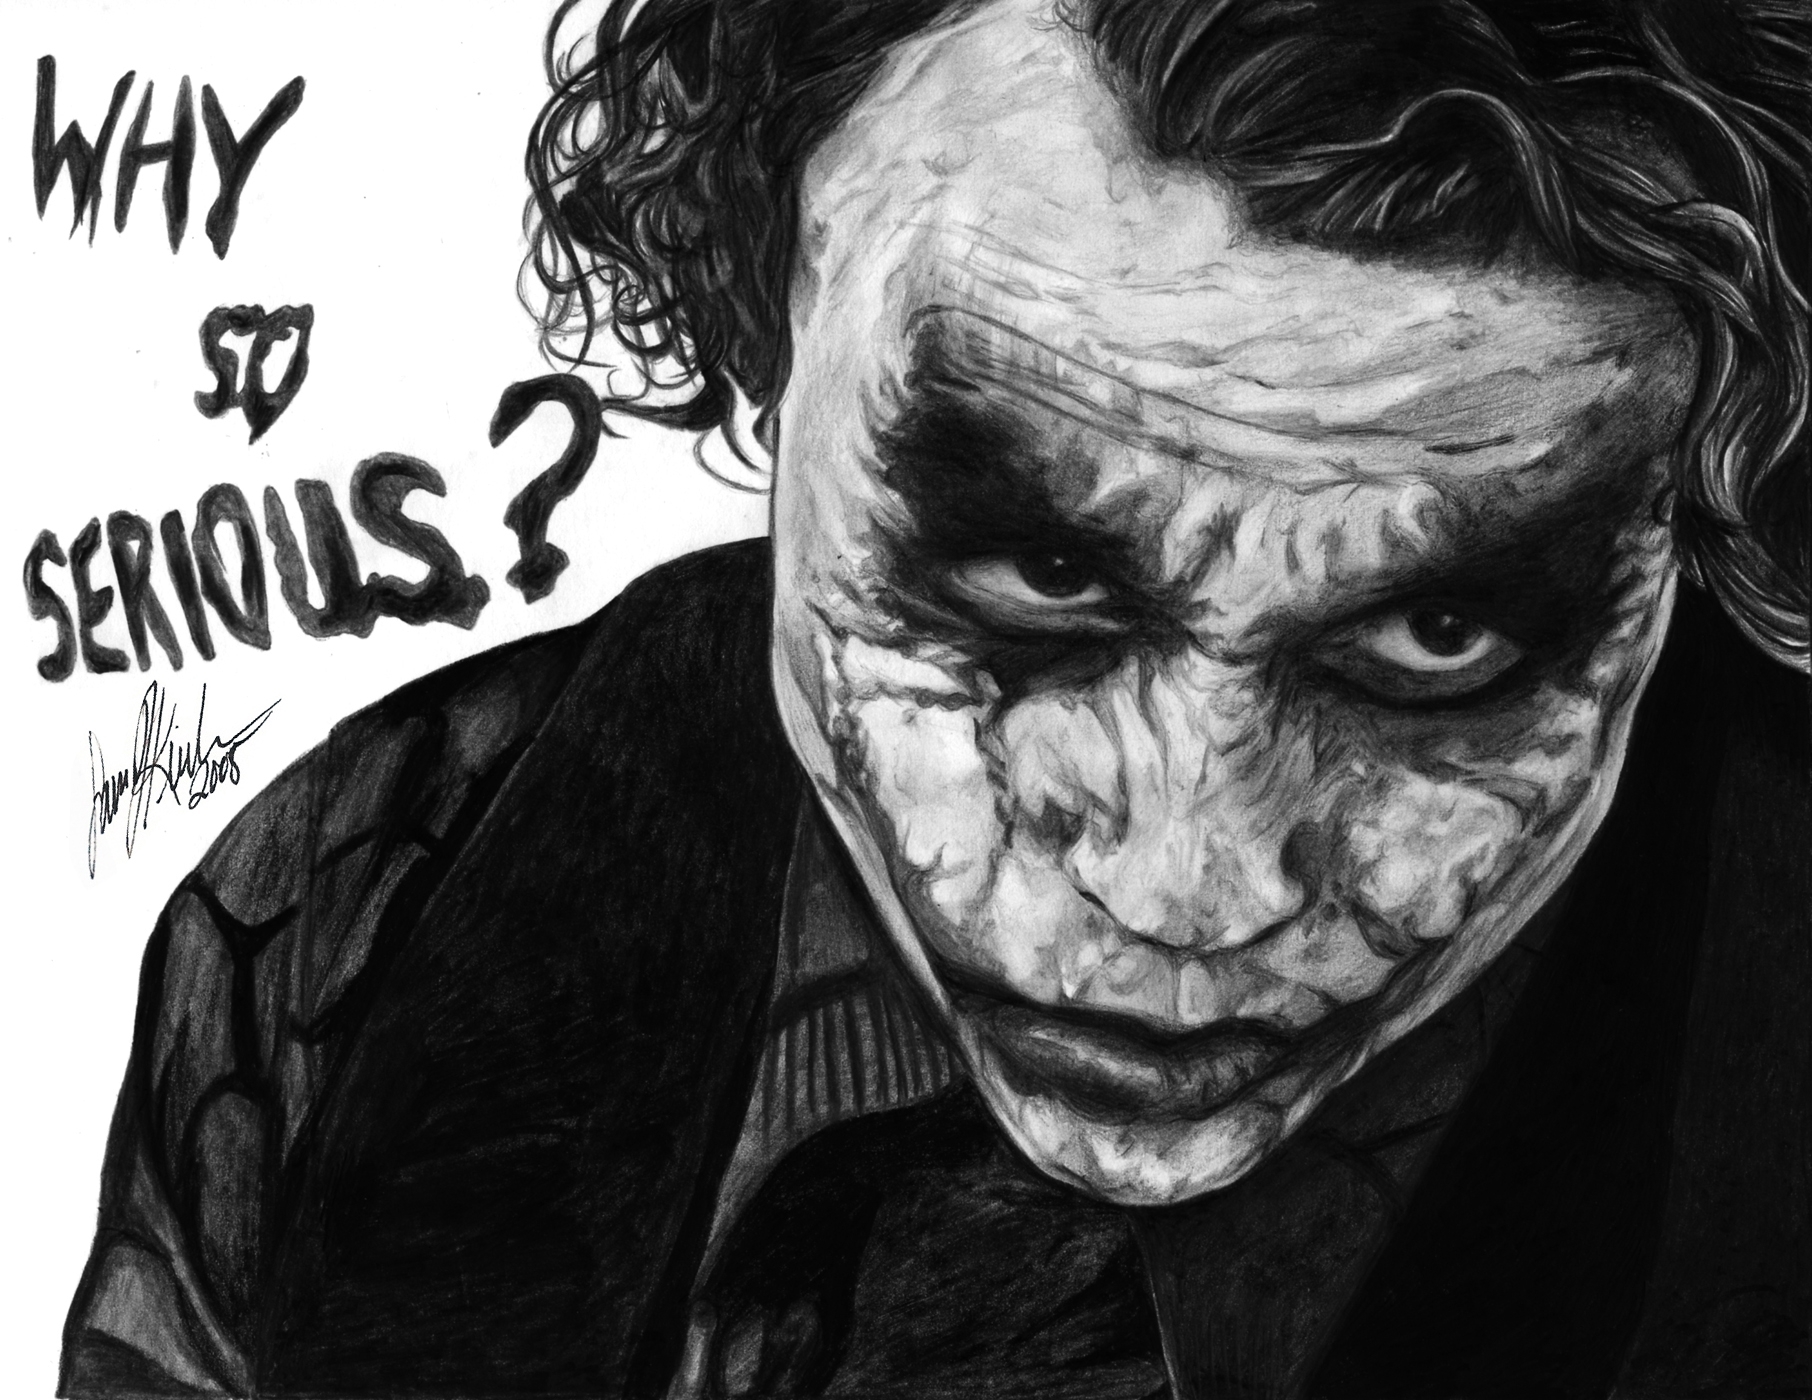 Title : heath ledger questions like, why so serious?&quot; -motivat...